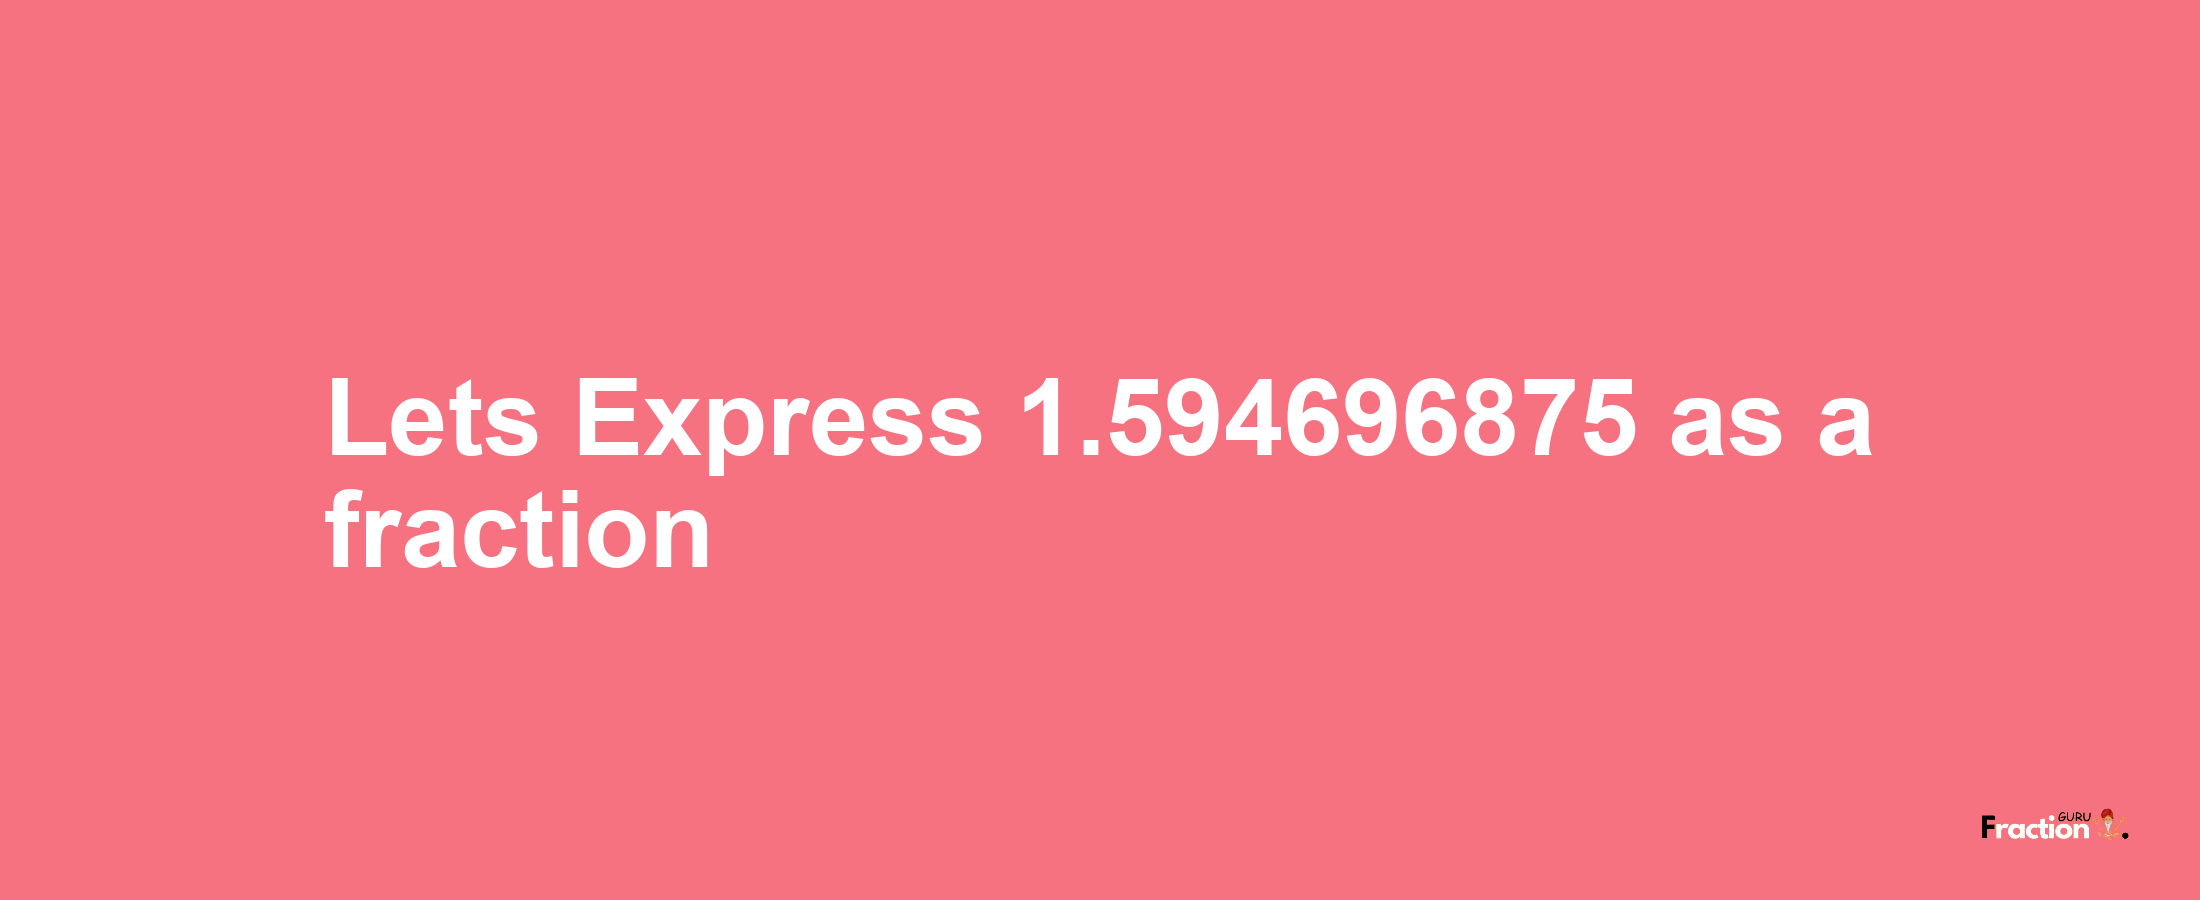 Lets Express 1.594696875 as afraction